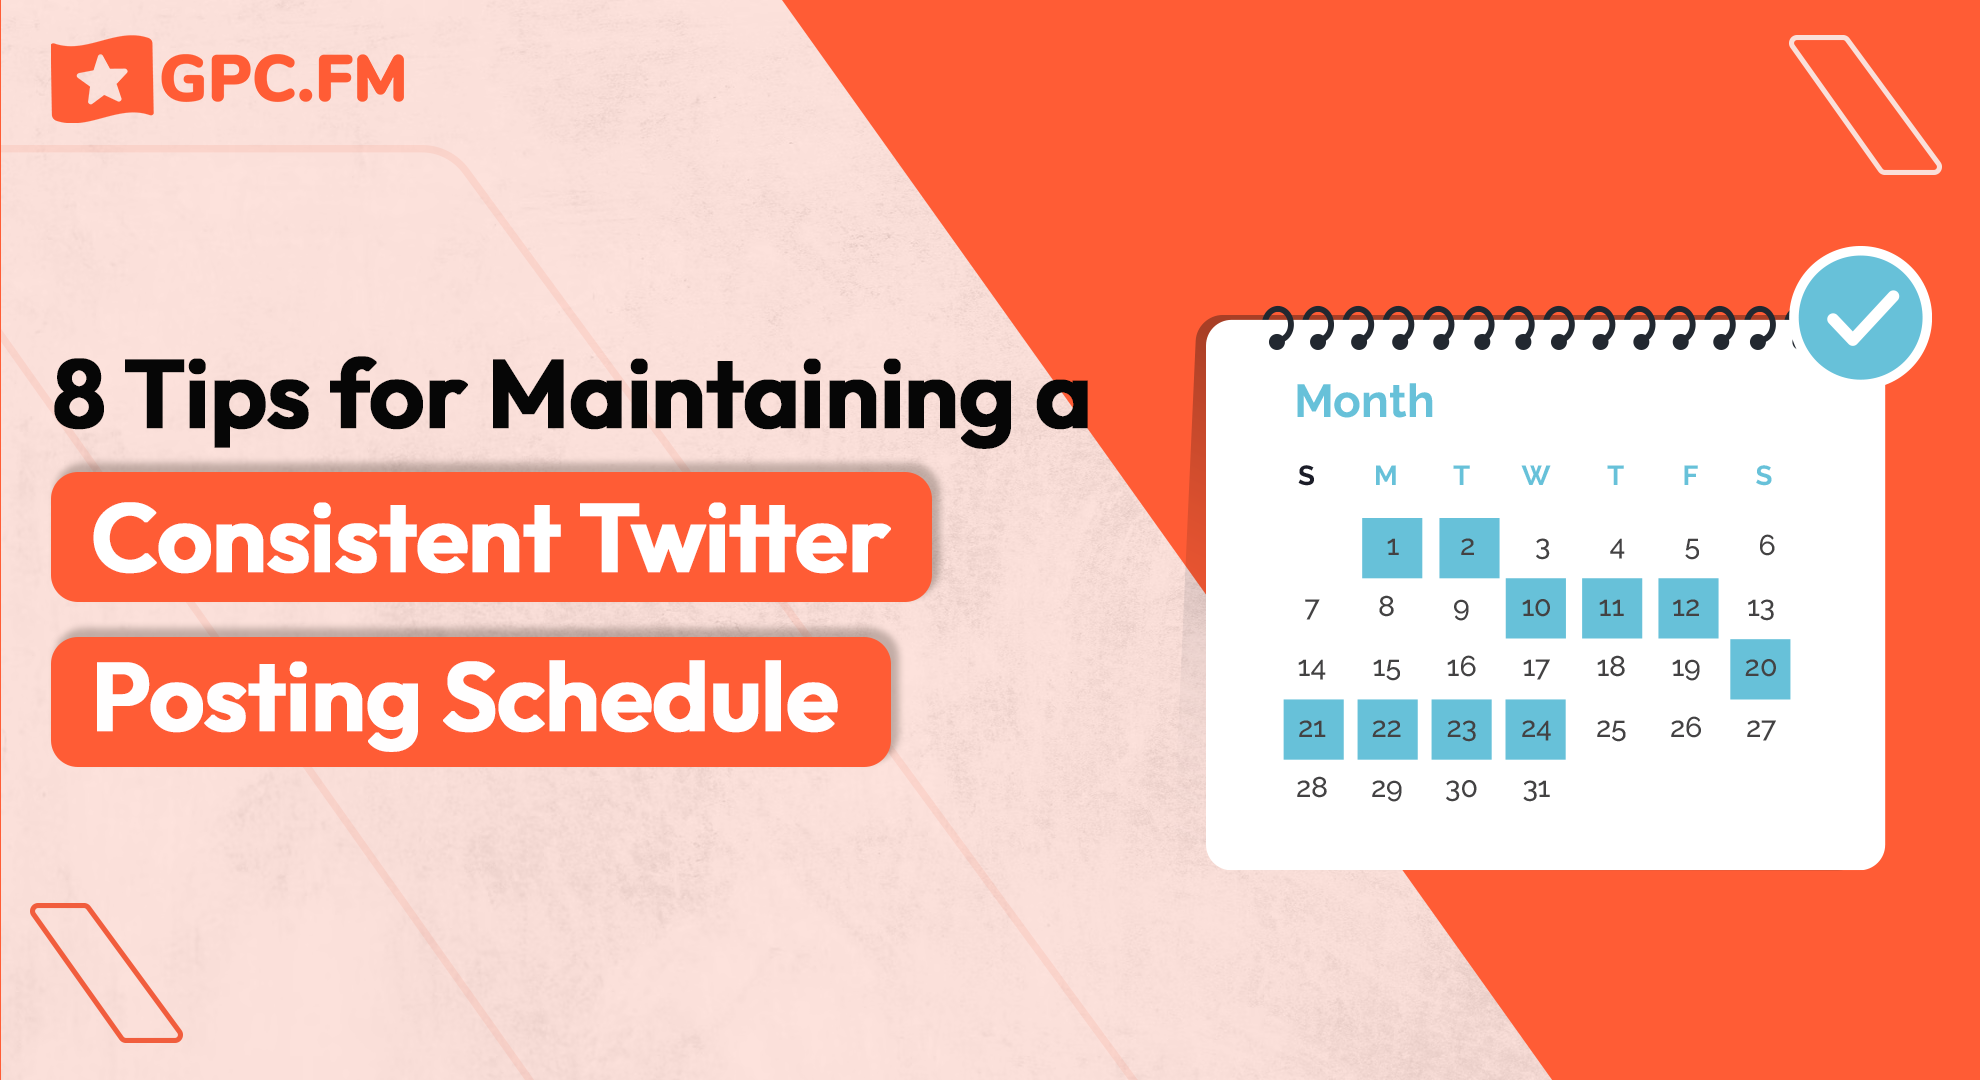 8 Tips for Maintaining a Consistent Twitter Posting Schedule